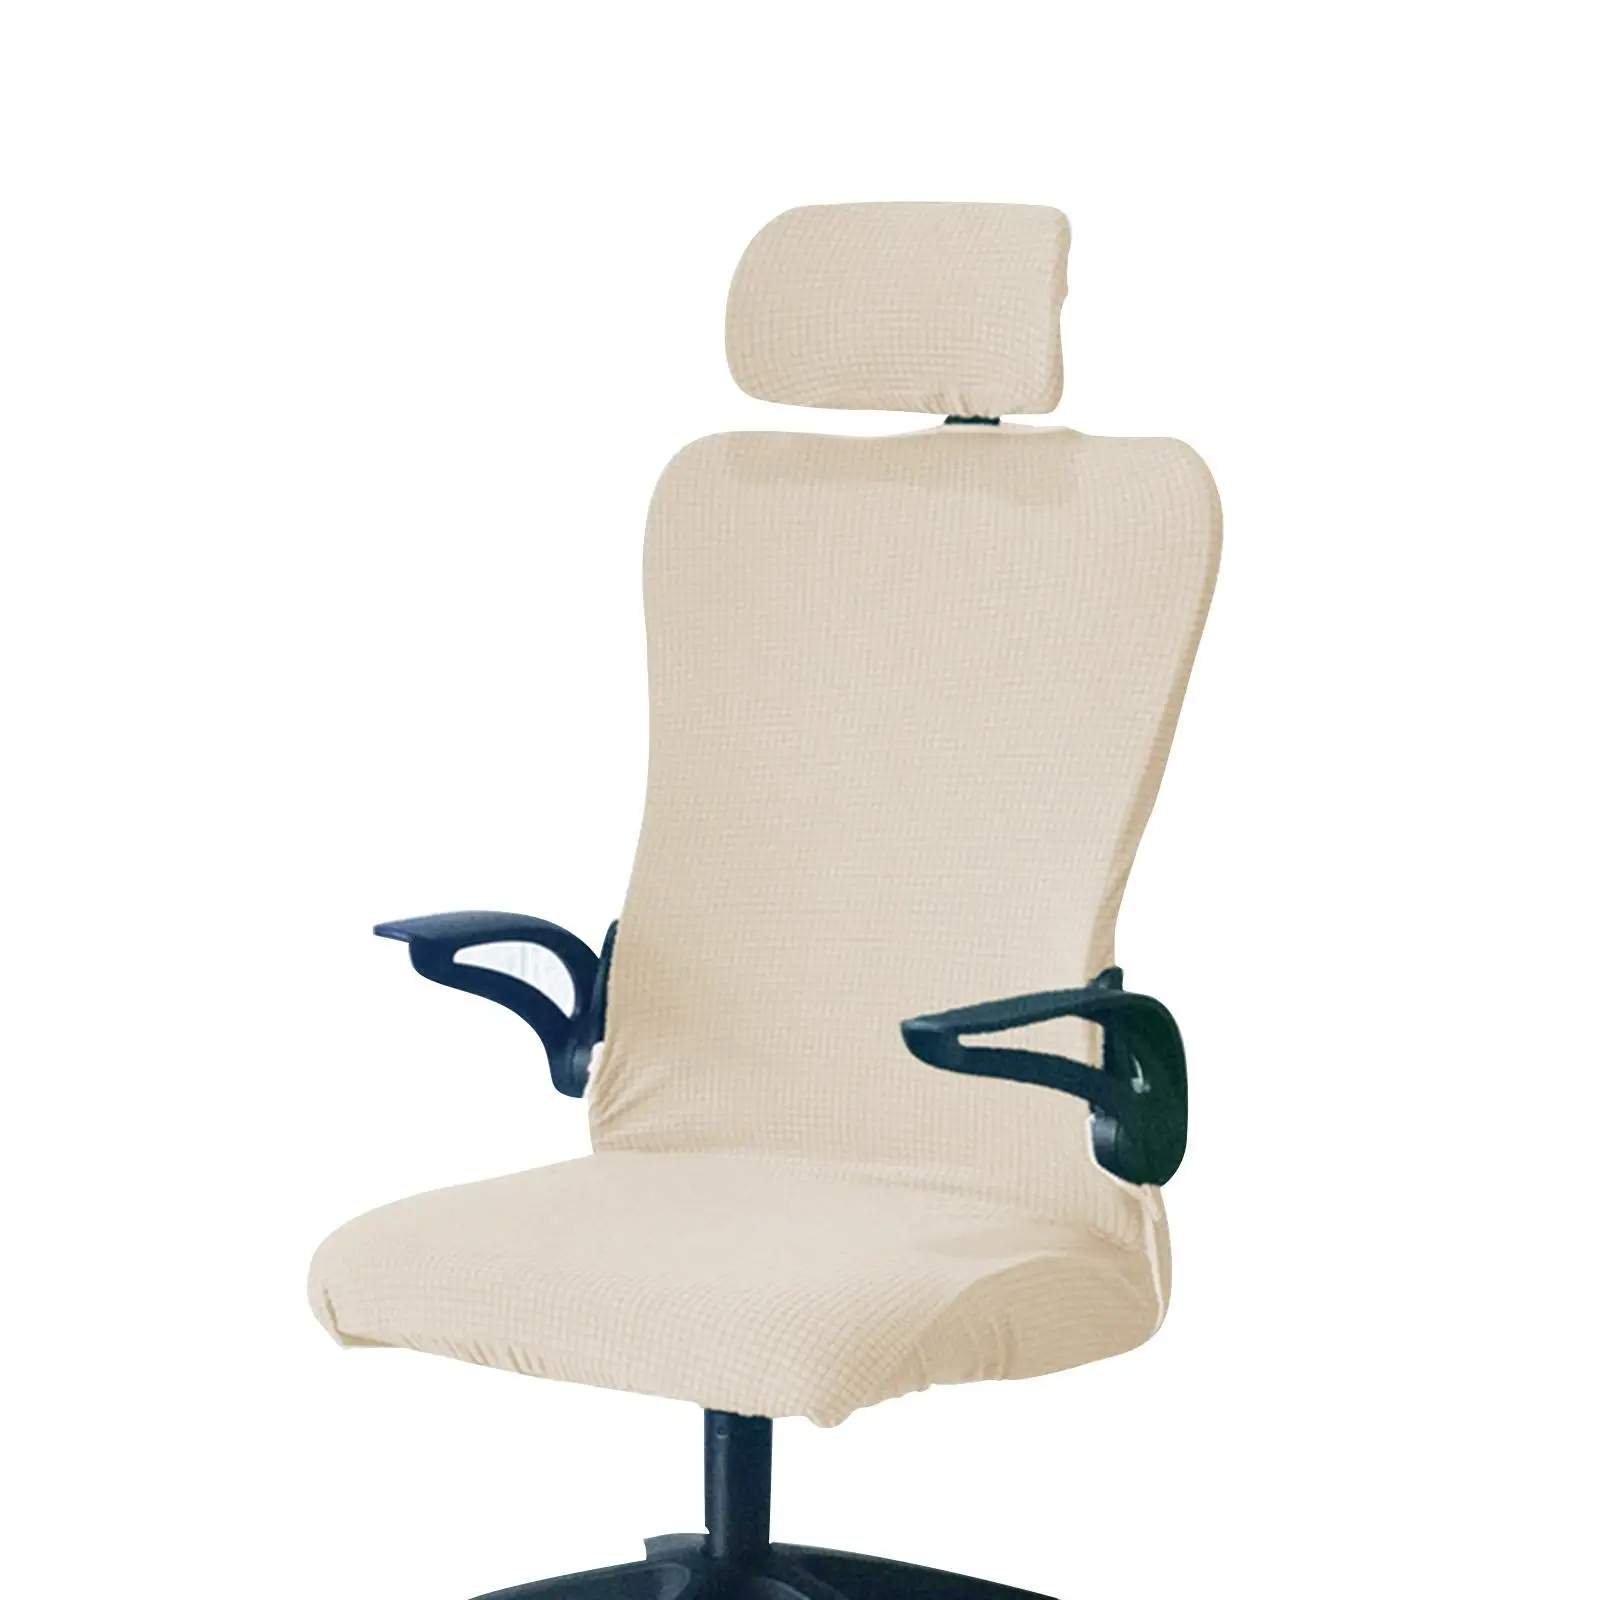 Office Chair Seat Covers with Headrest cover Chair Slipcovers for Home